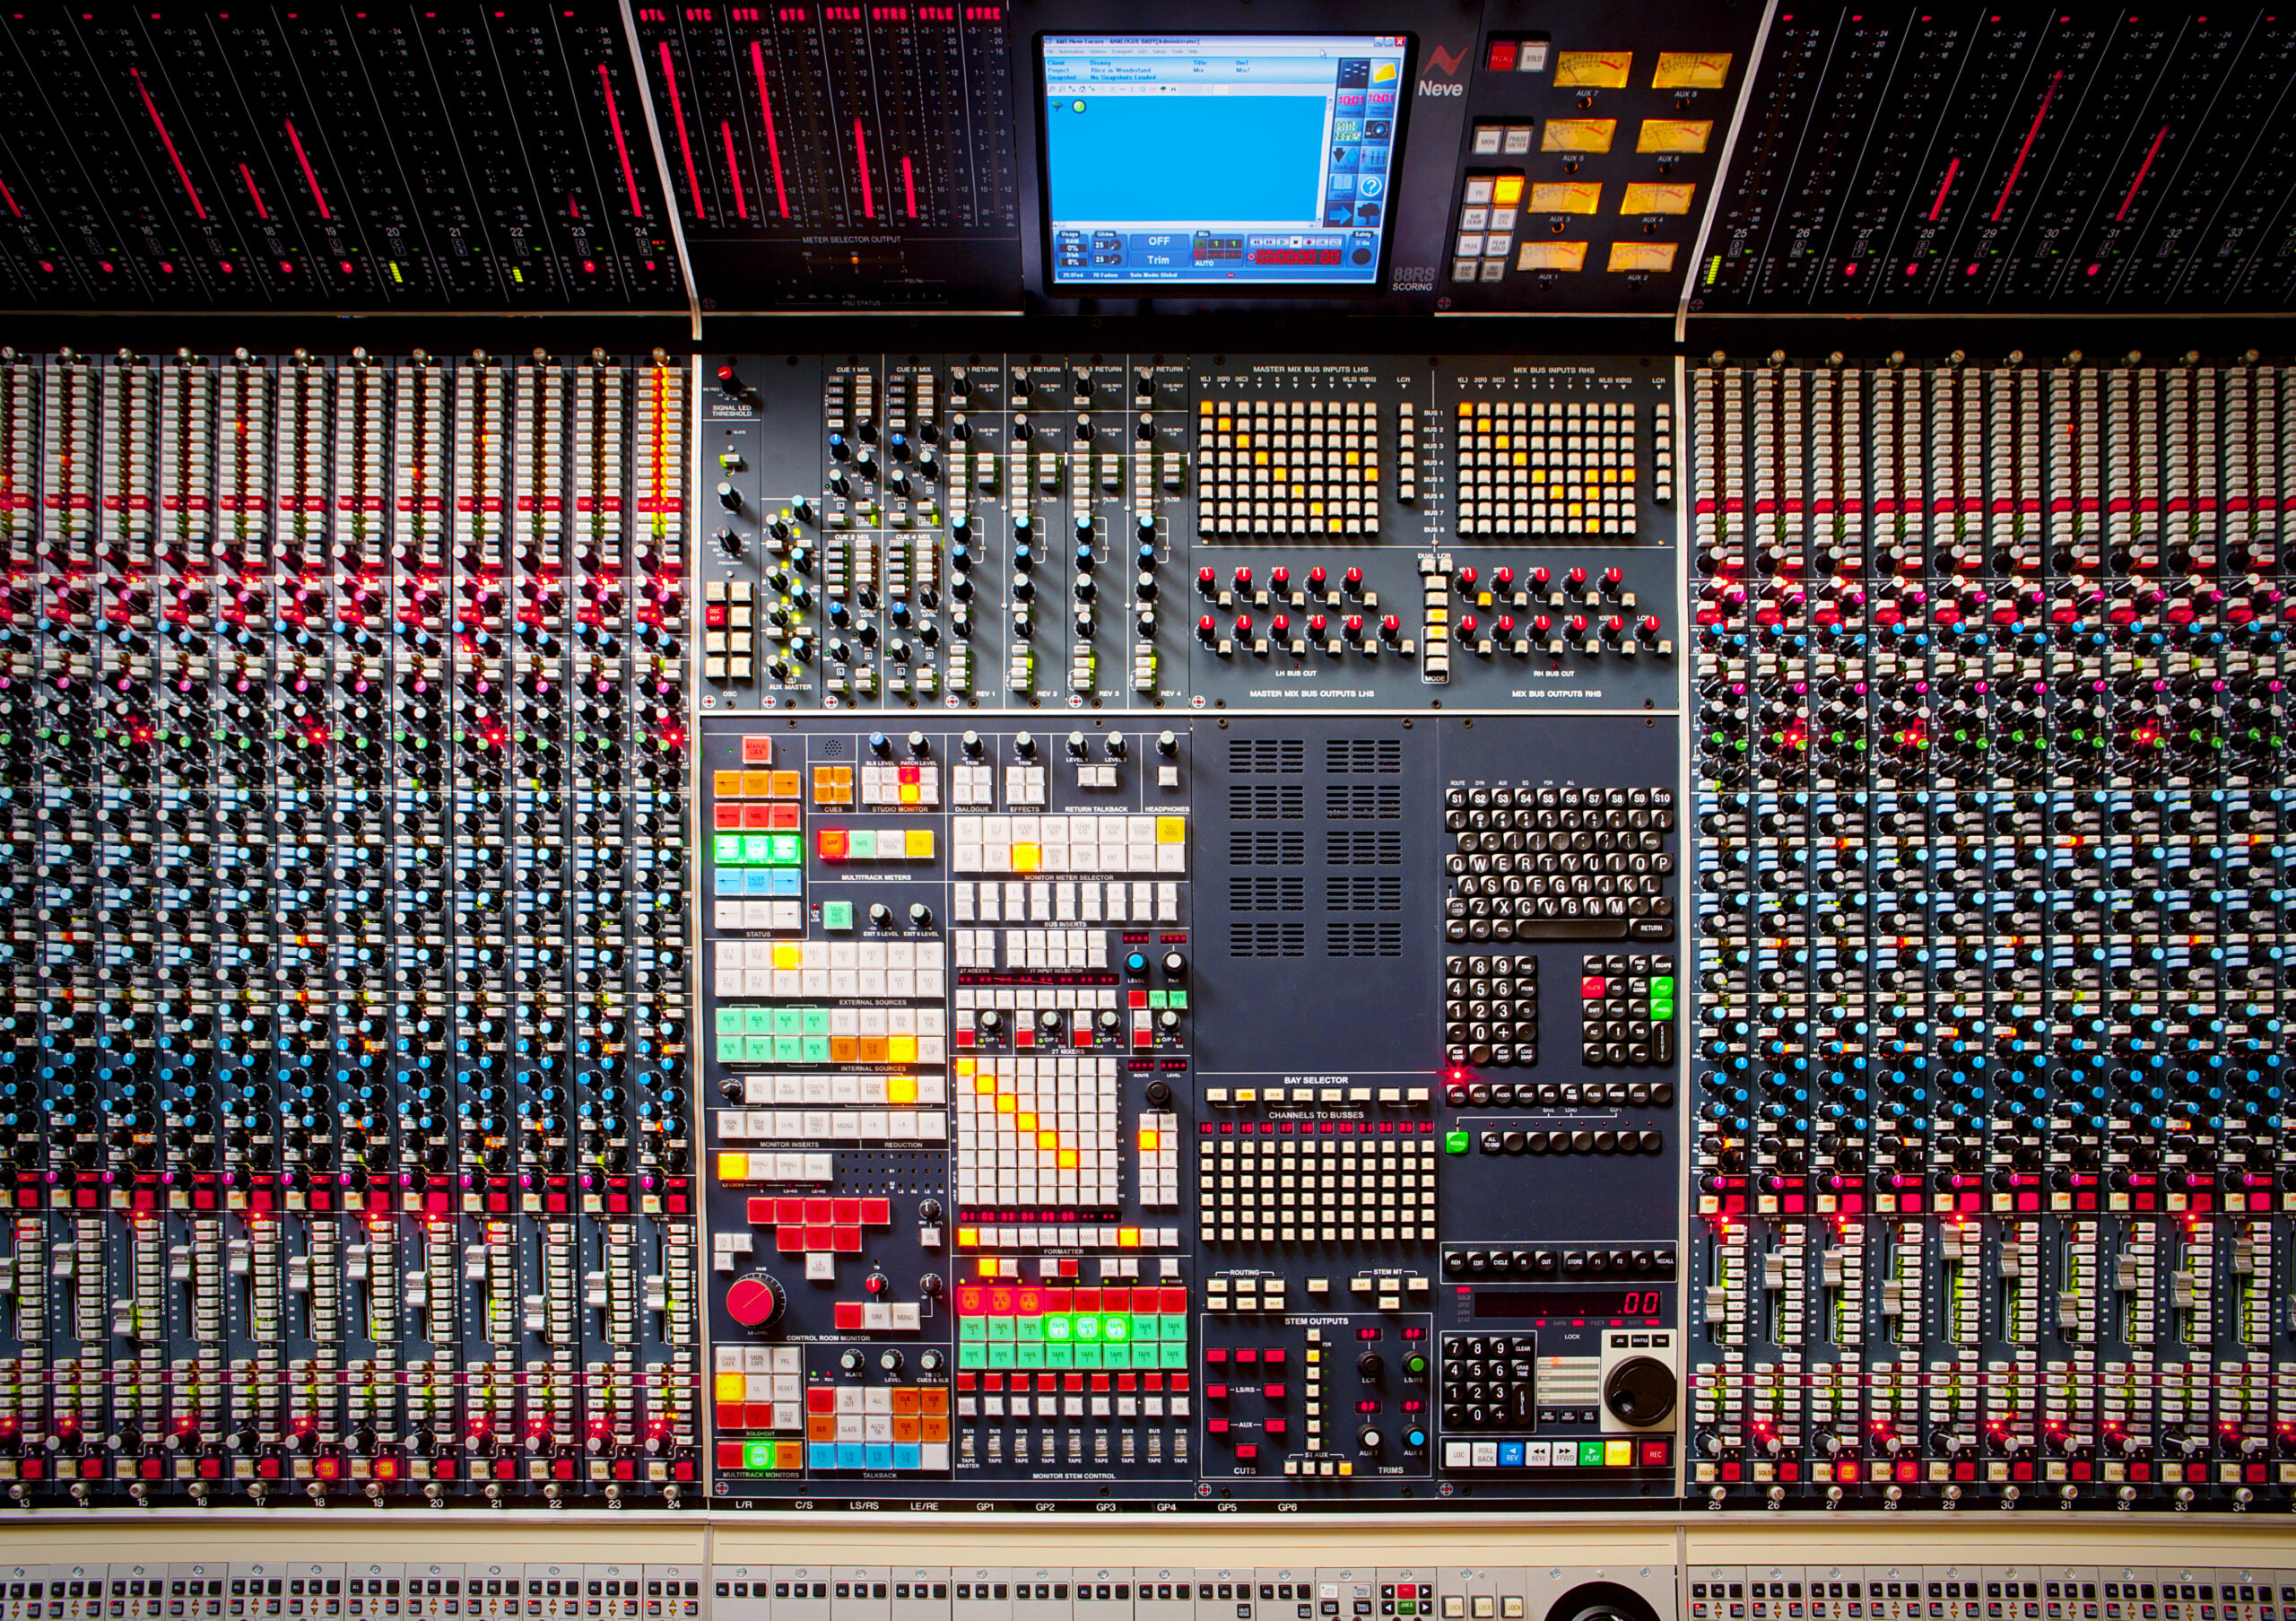 Neve 88RS for Top American Conservatoire